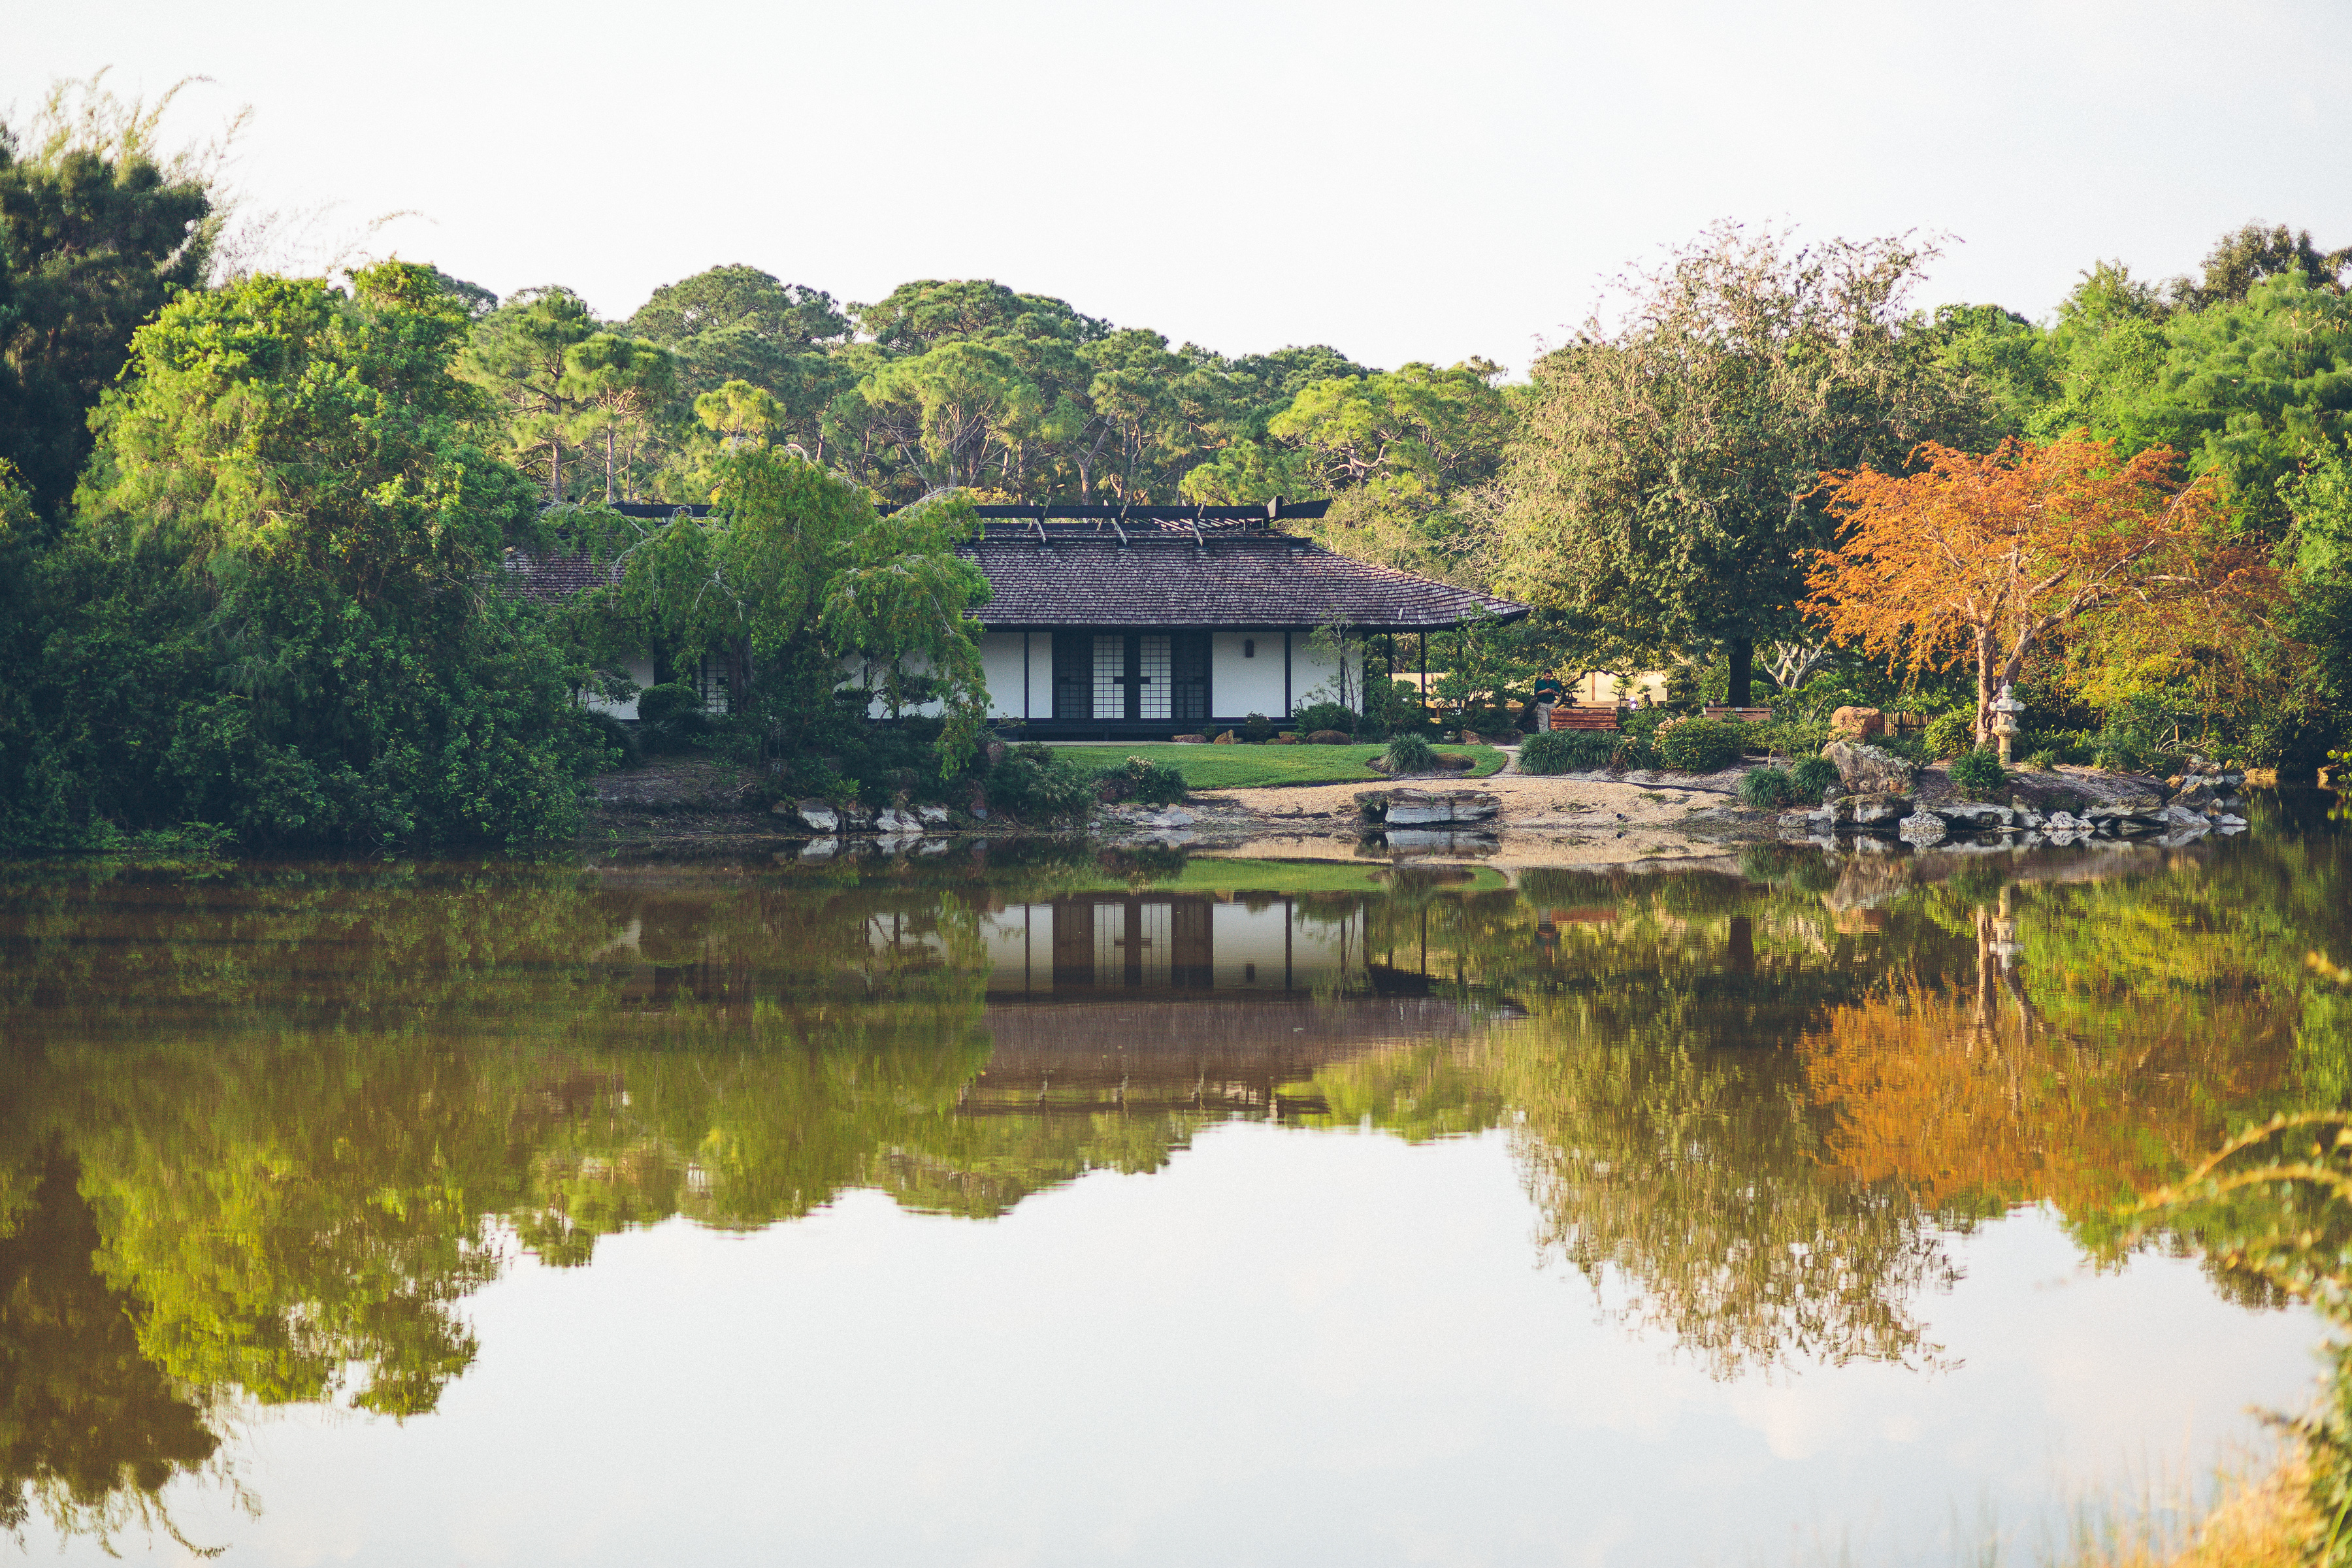 Things To Do In South Florida COVID-19 Morikami Museum and Gardens